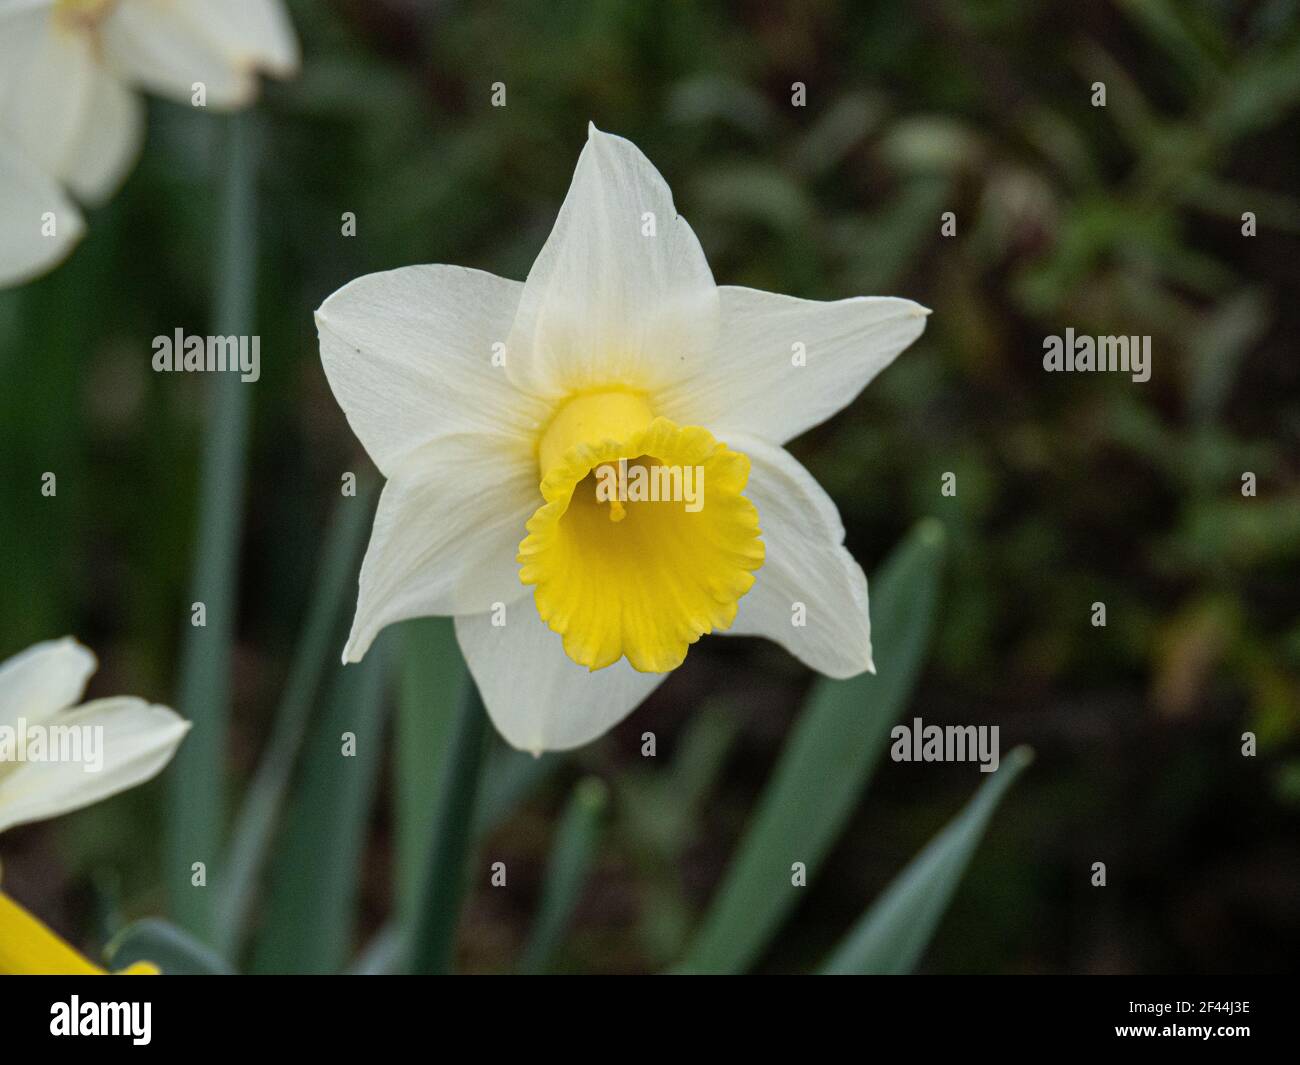 A close up of a single pale yellow and white flower of the early daffodil Narcissus Spring Dawn Stock Photo